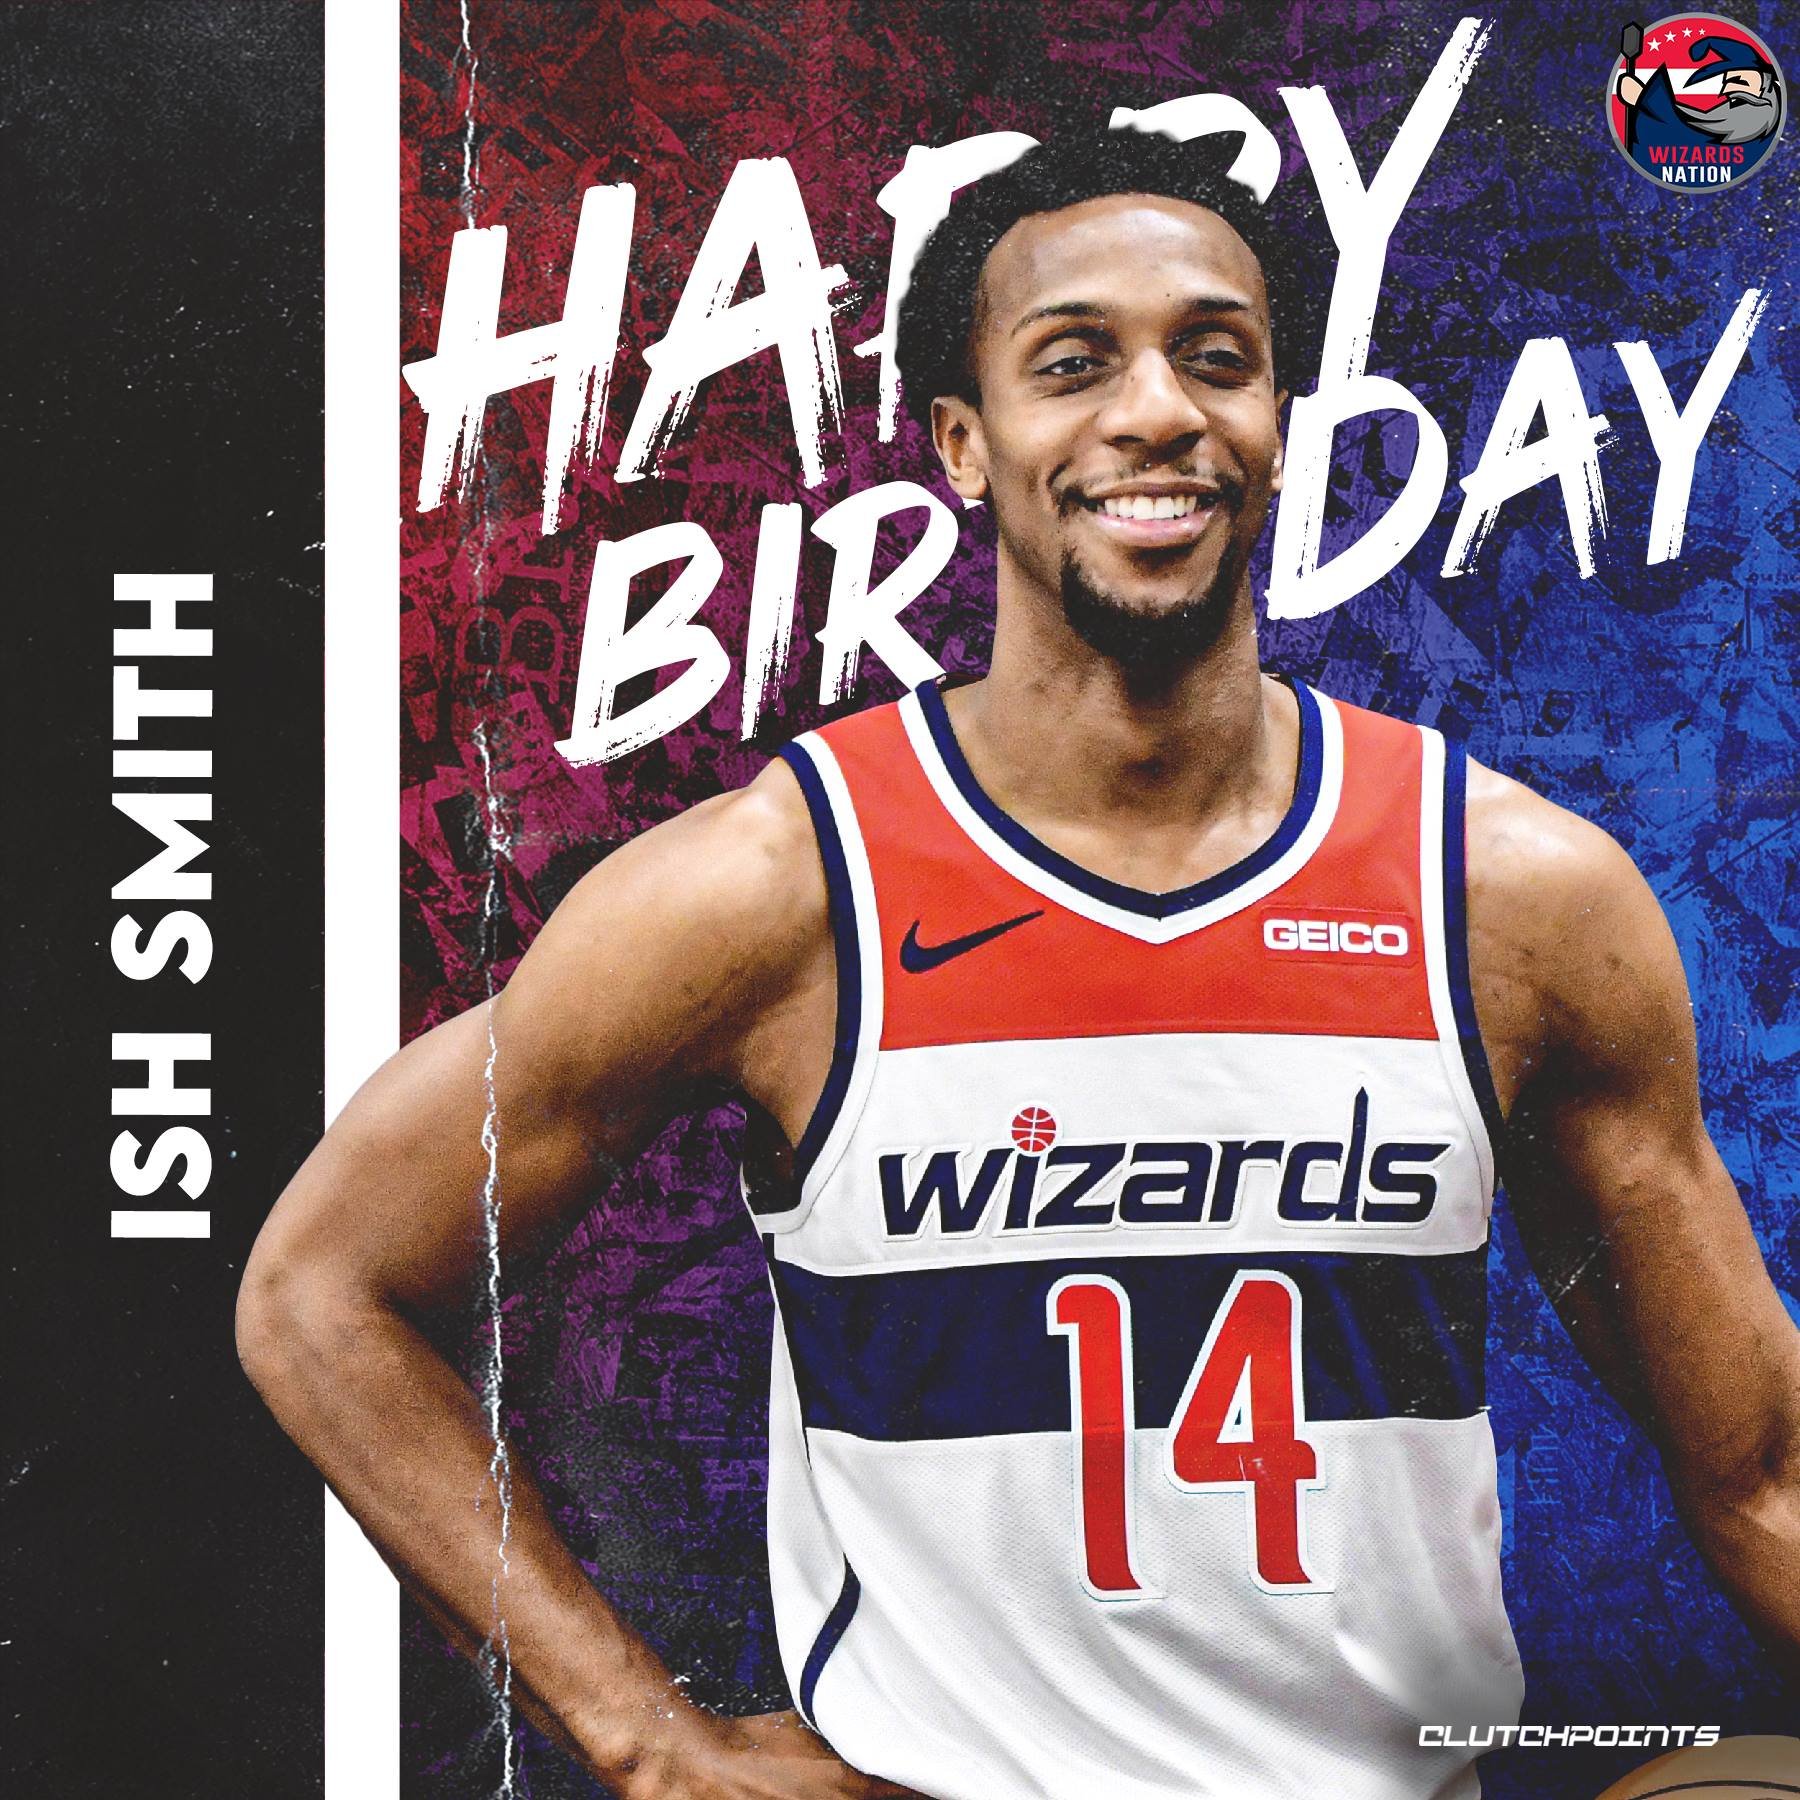 Wizards Nation, join us in wishing Ish Smith a happy birthday! 